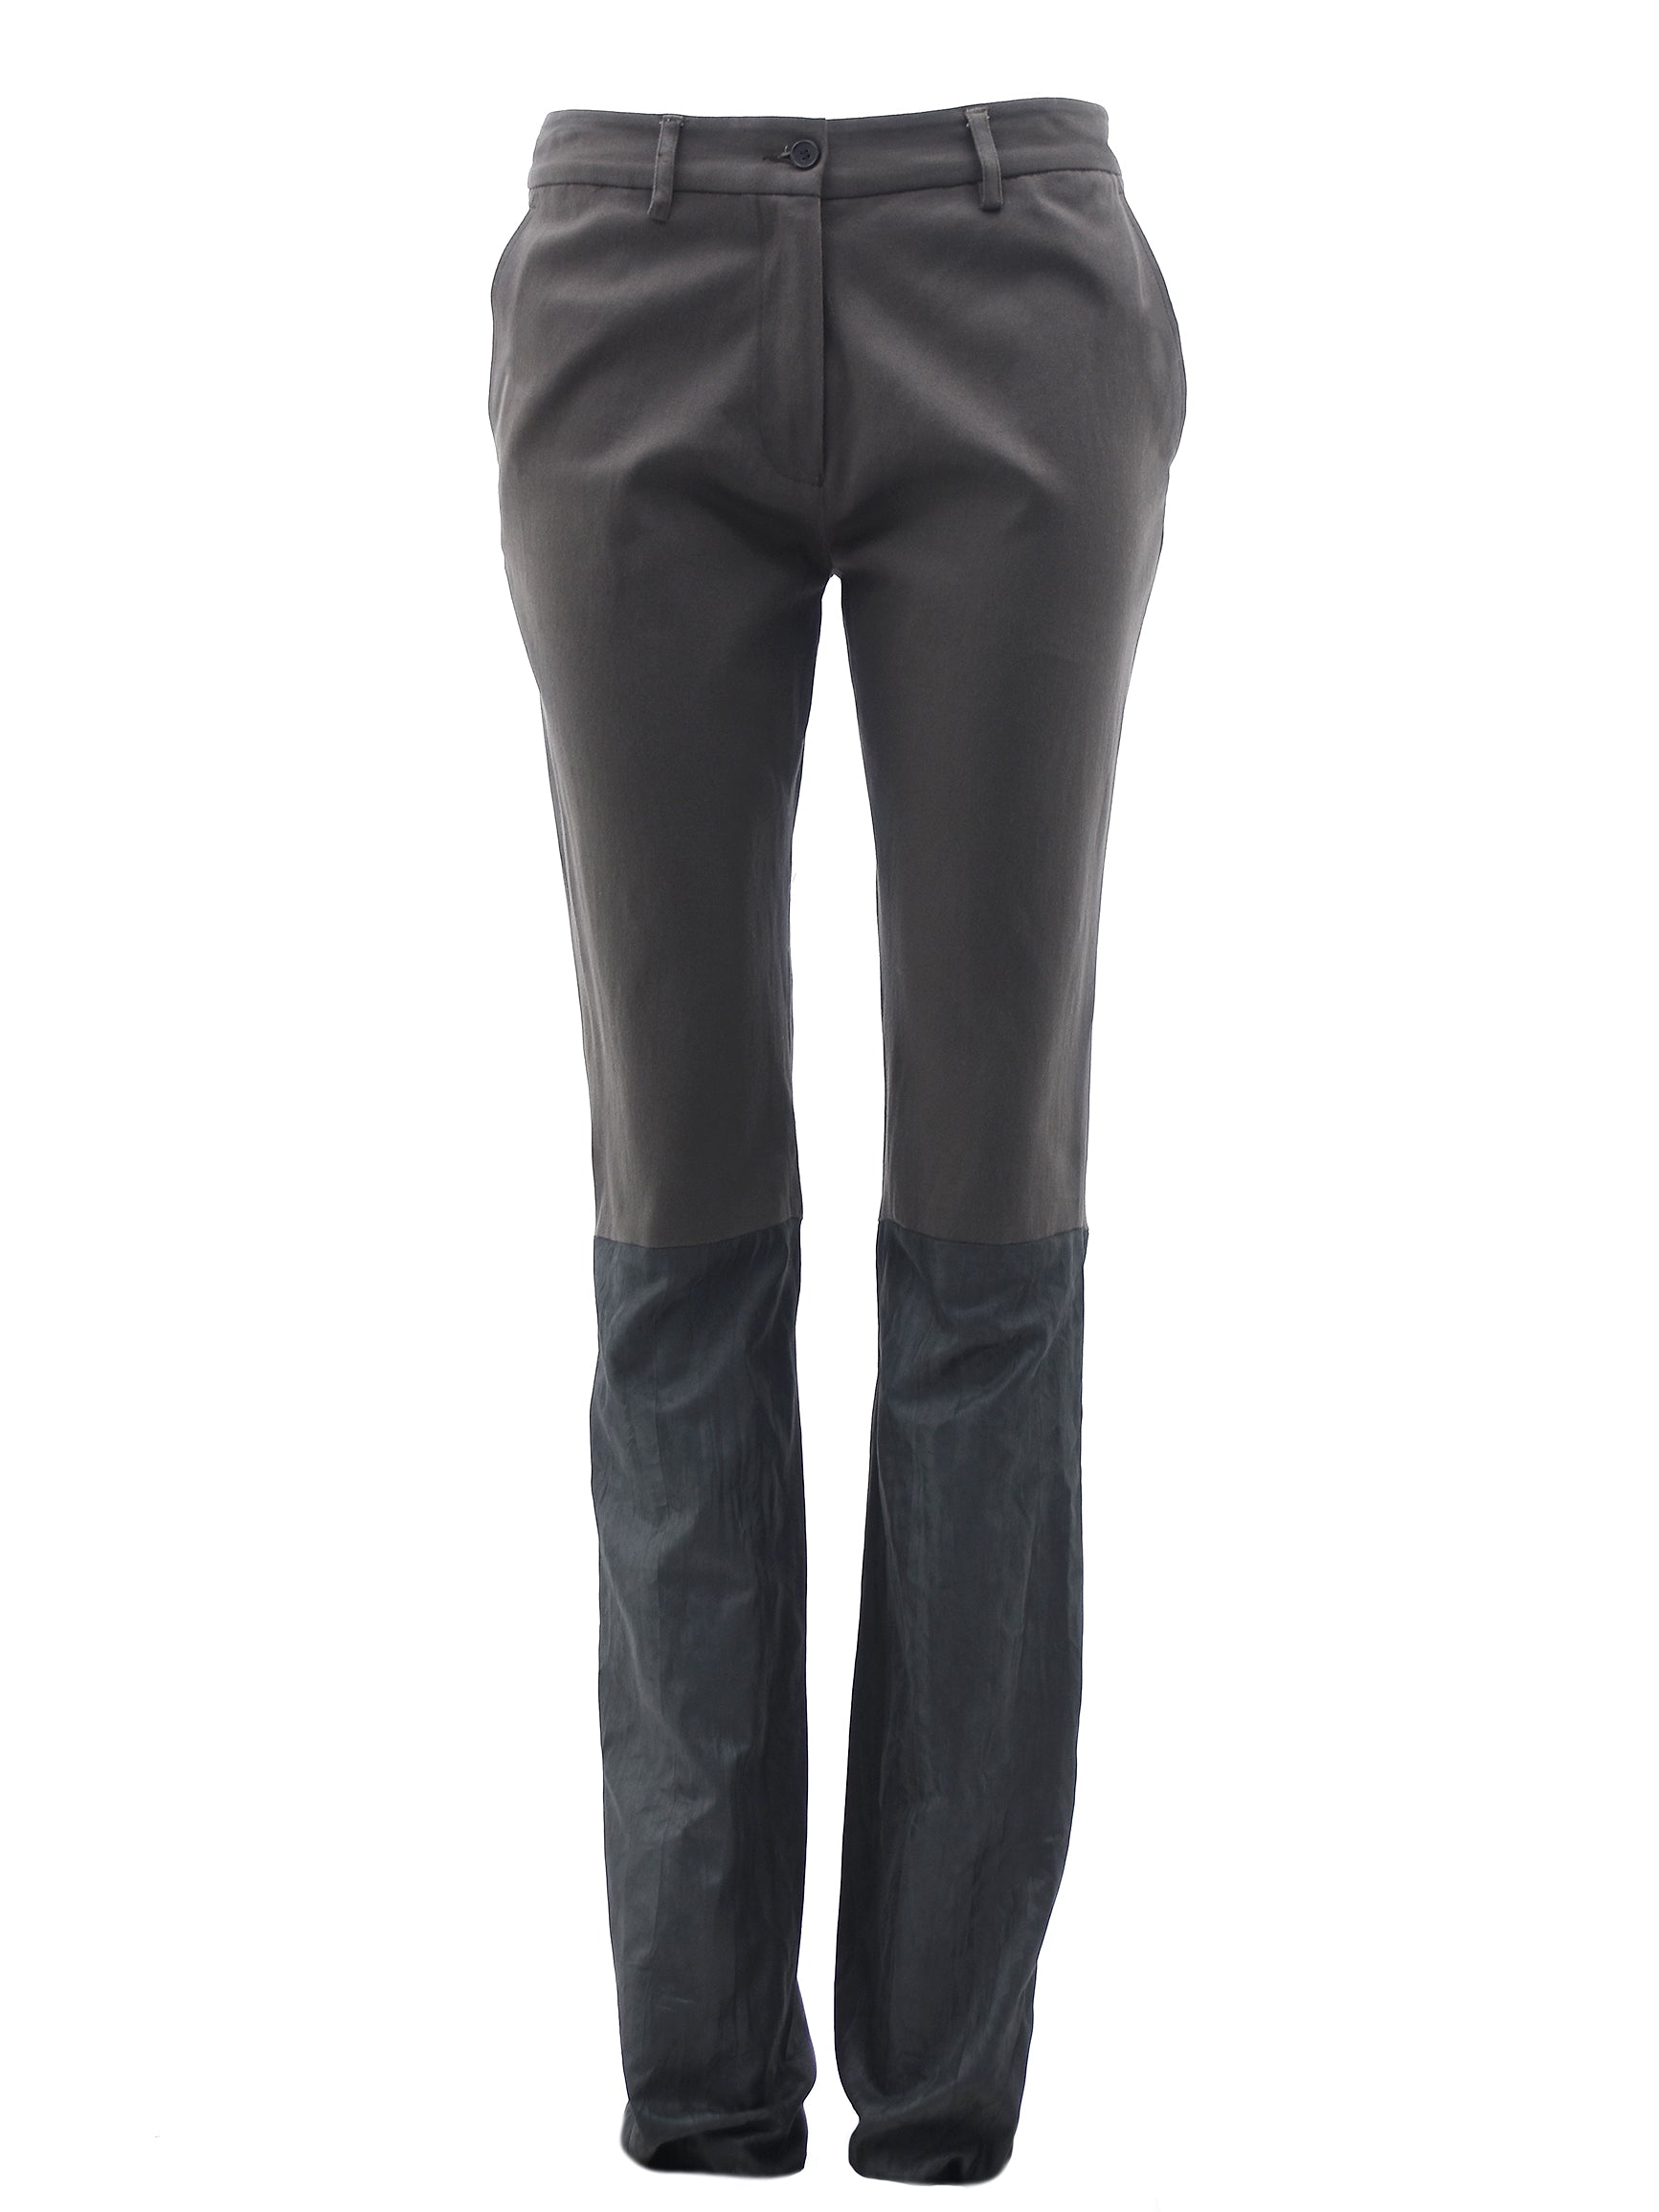 BROWN TROUSERS WITH BLACK SILK LOWER LEG